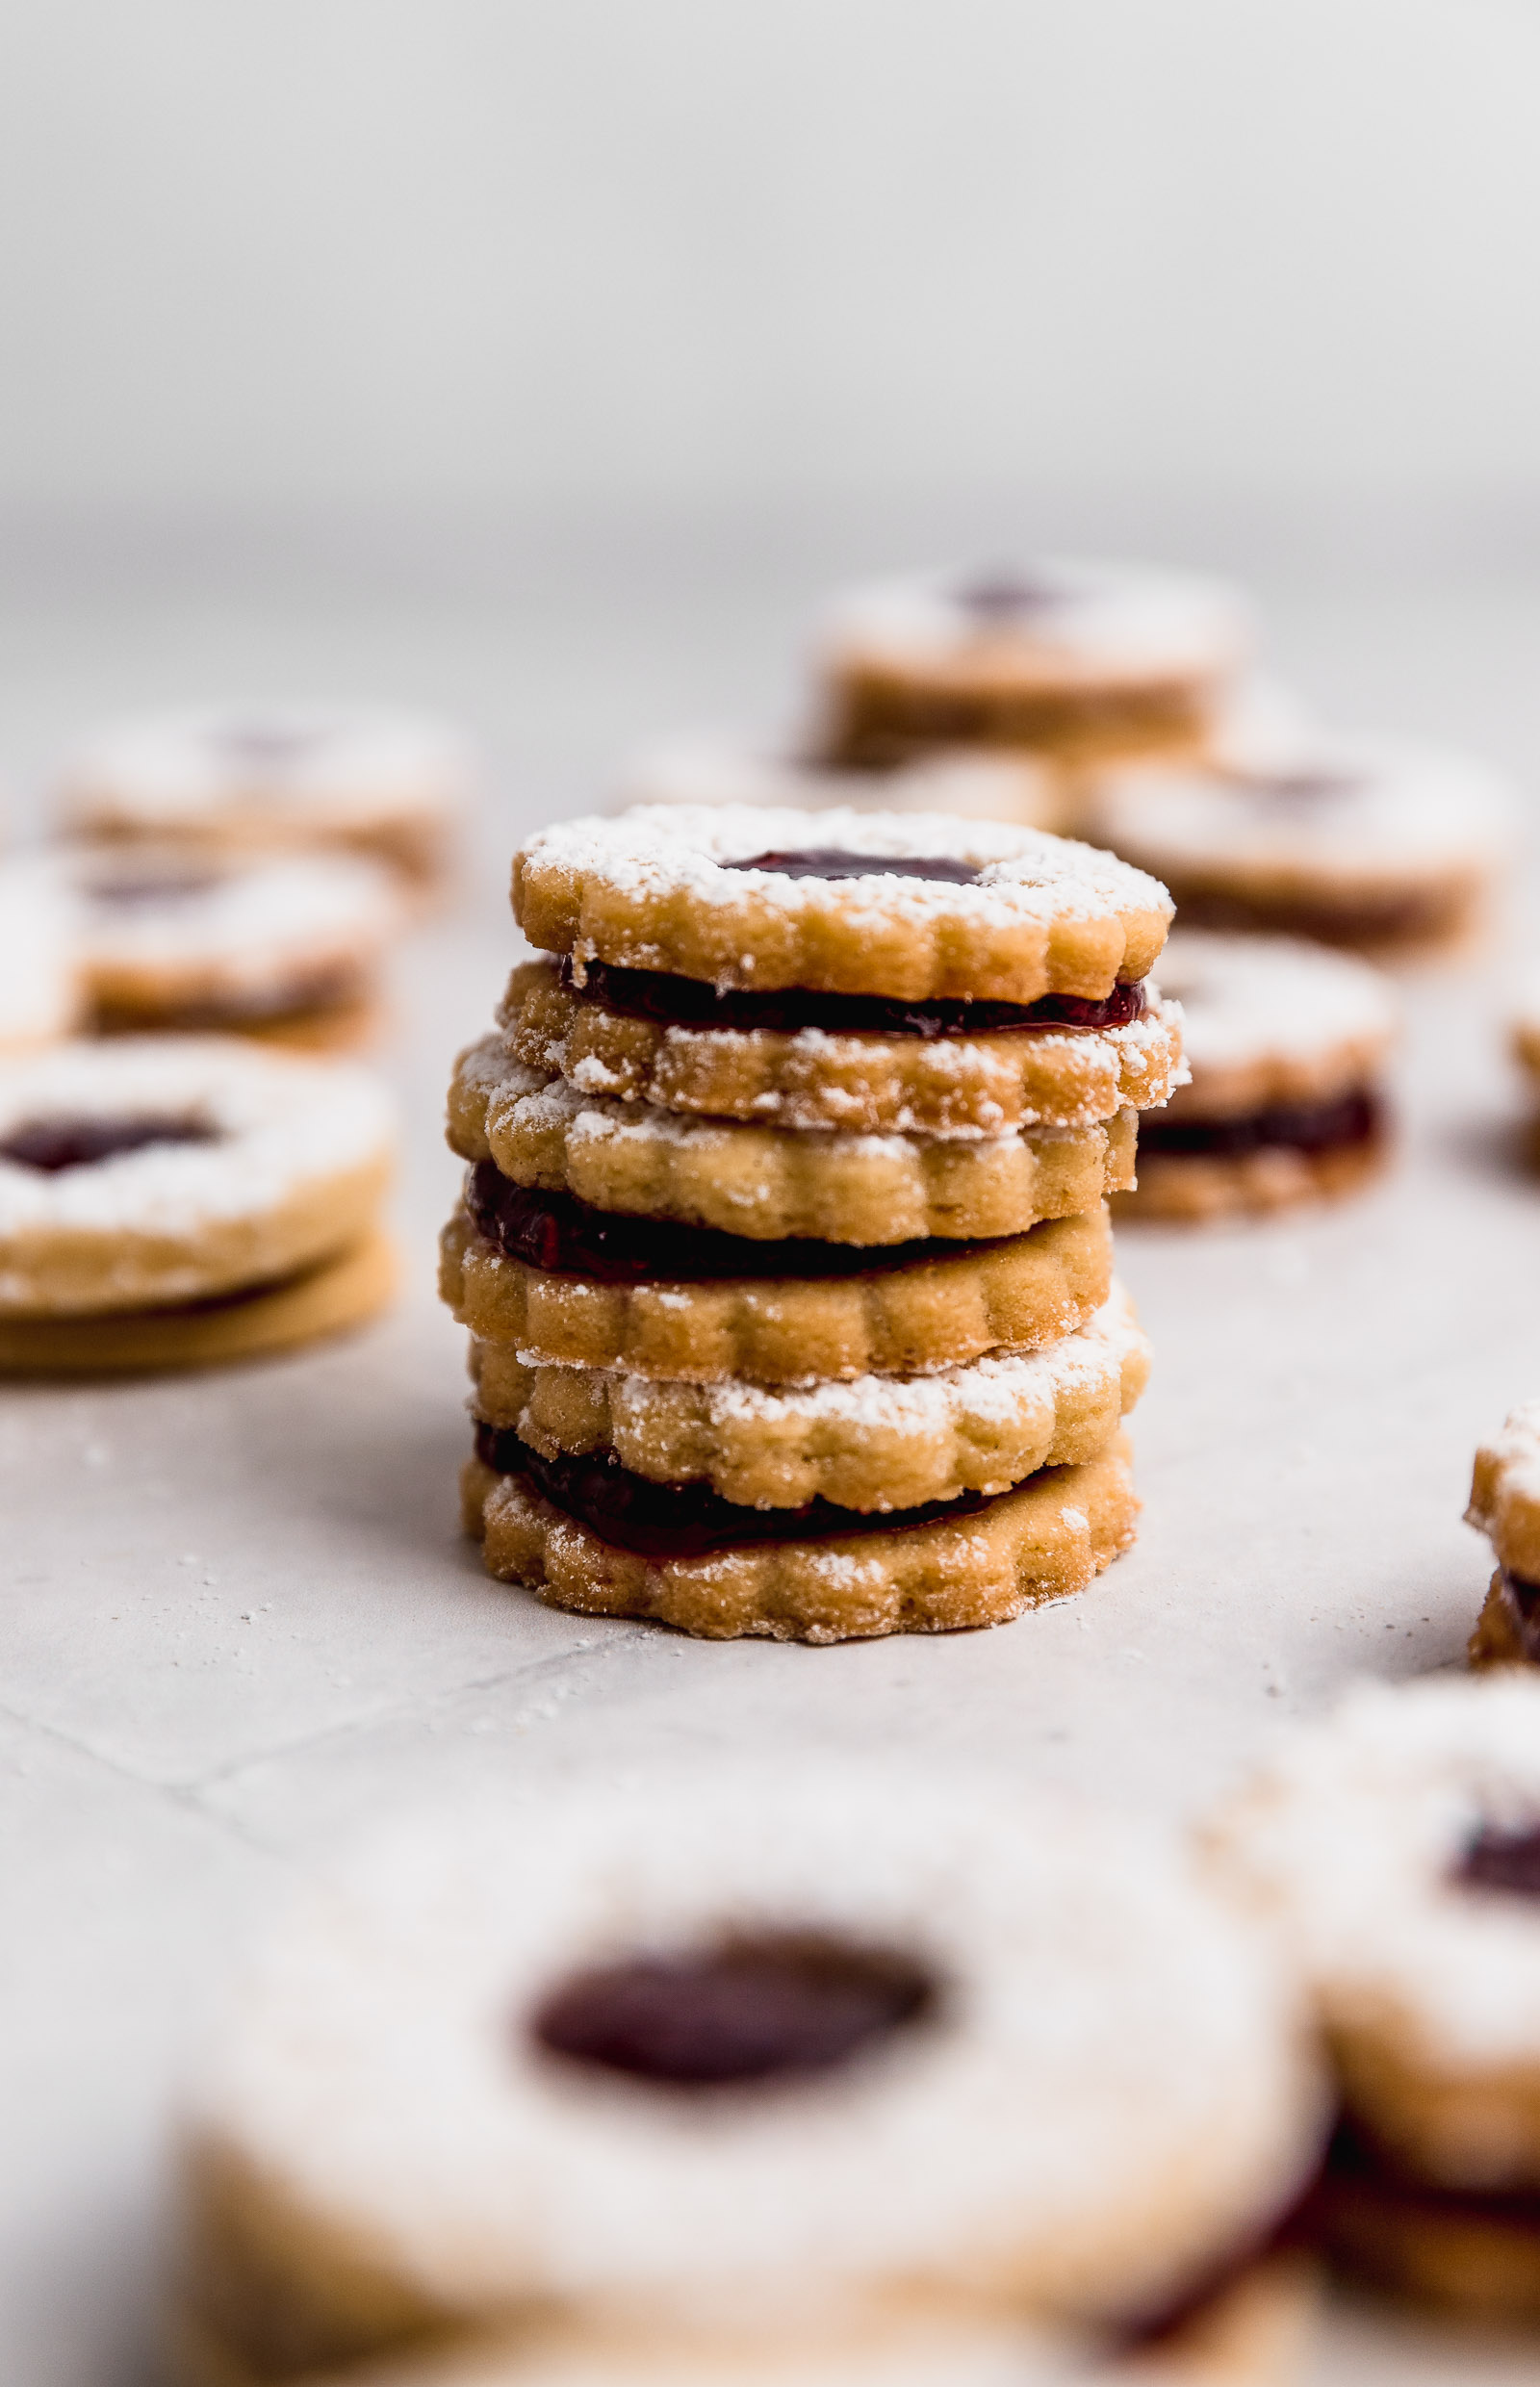 Side view of nut-free linzer cookies where you can see the thickness of the cookies and the raspberry filling.